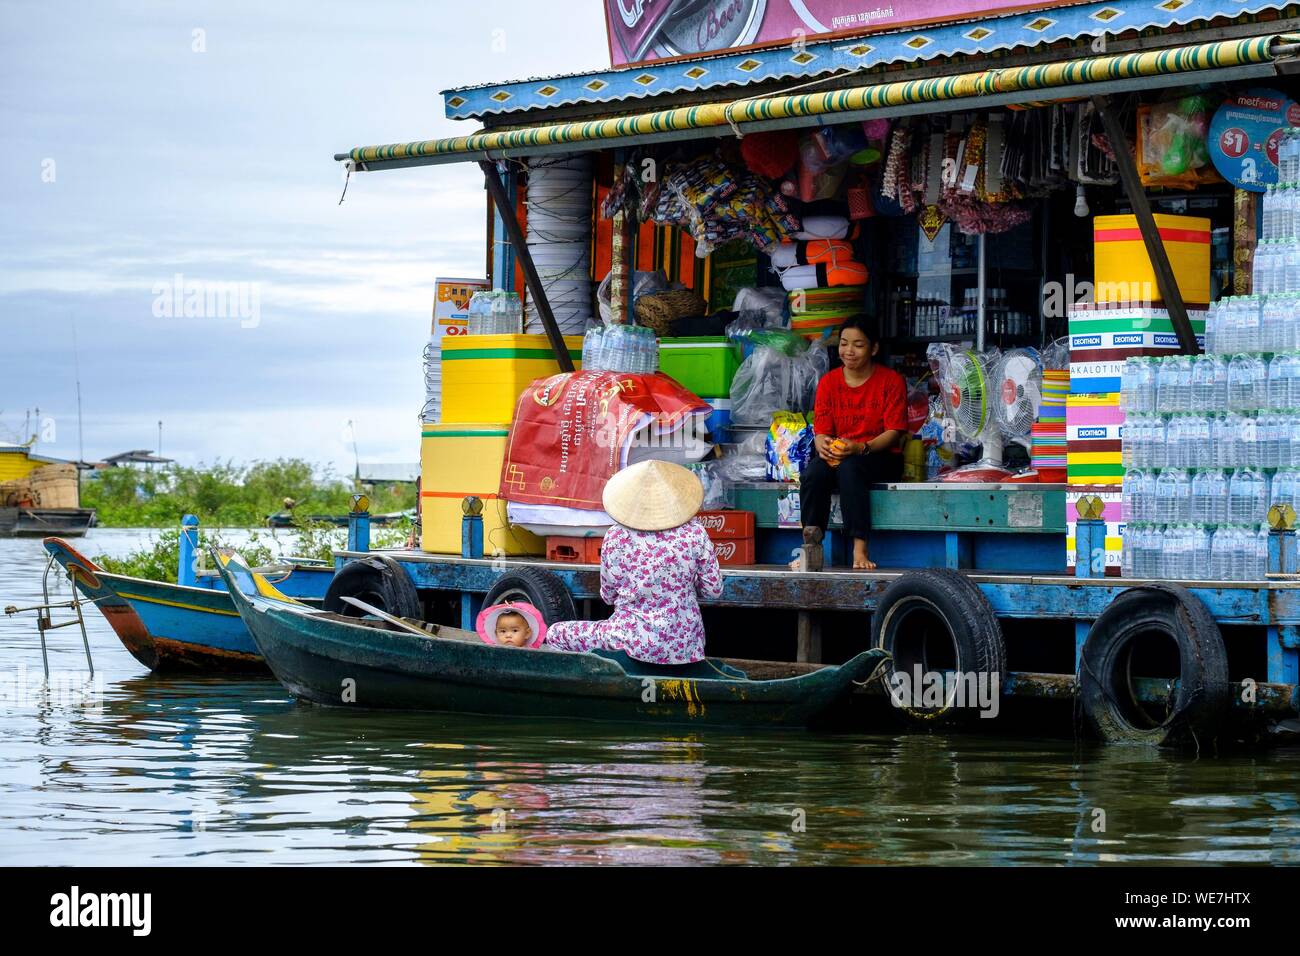 Cambodia, Kampong Cham province, Kampong Cham or Kompong Cham, floating village with a khmer and vieynamese community Stock Photo